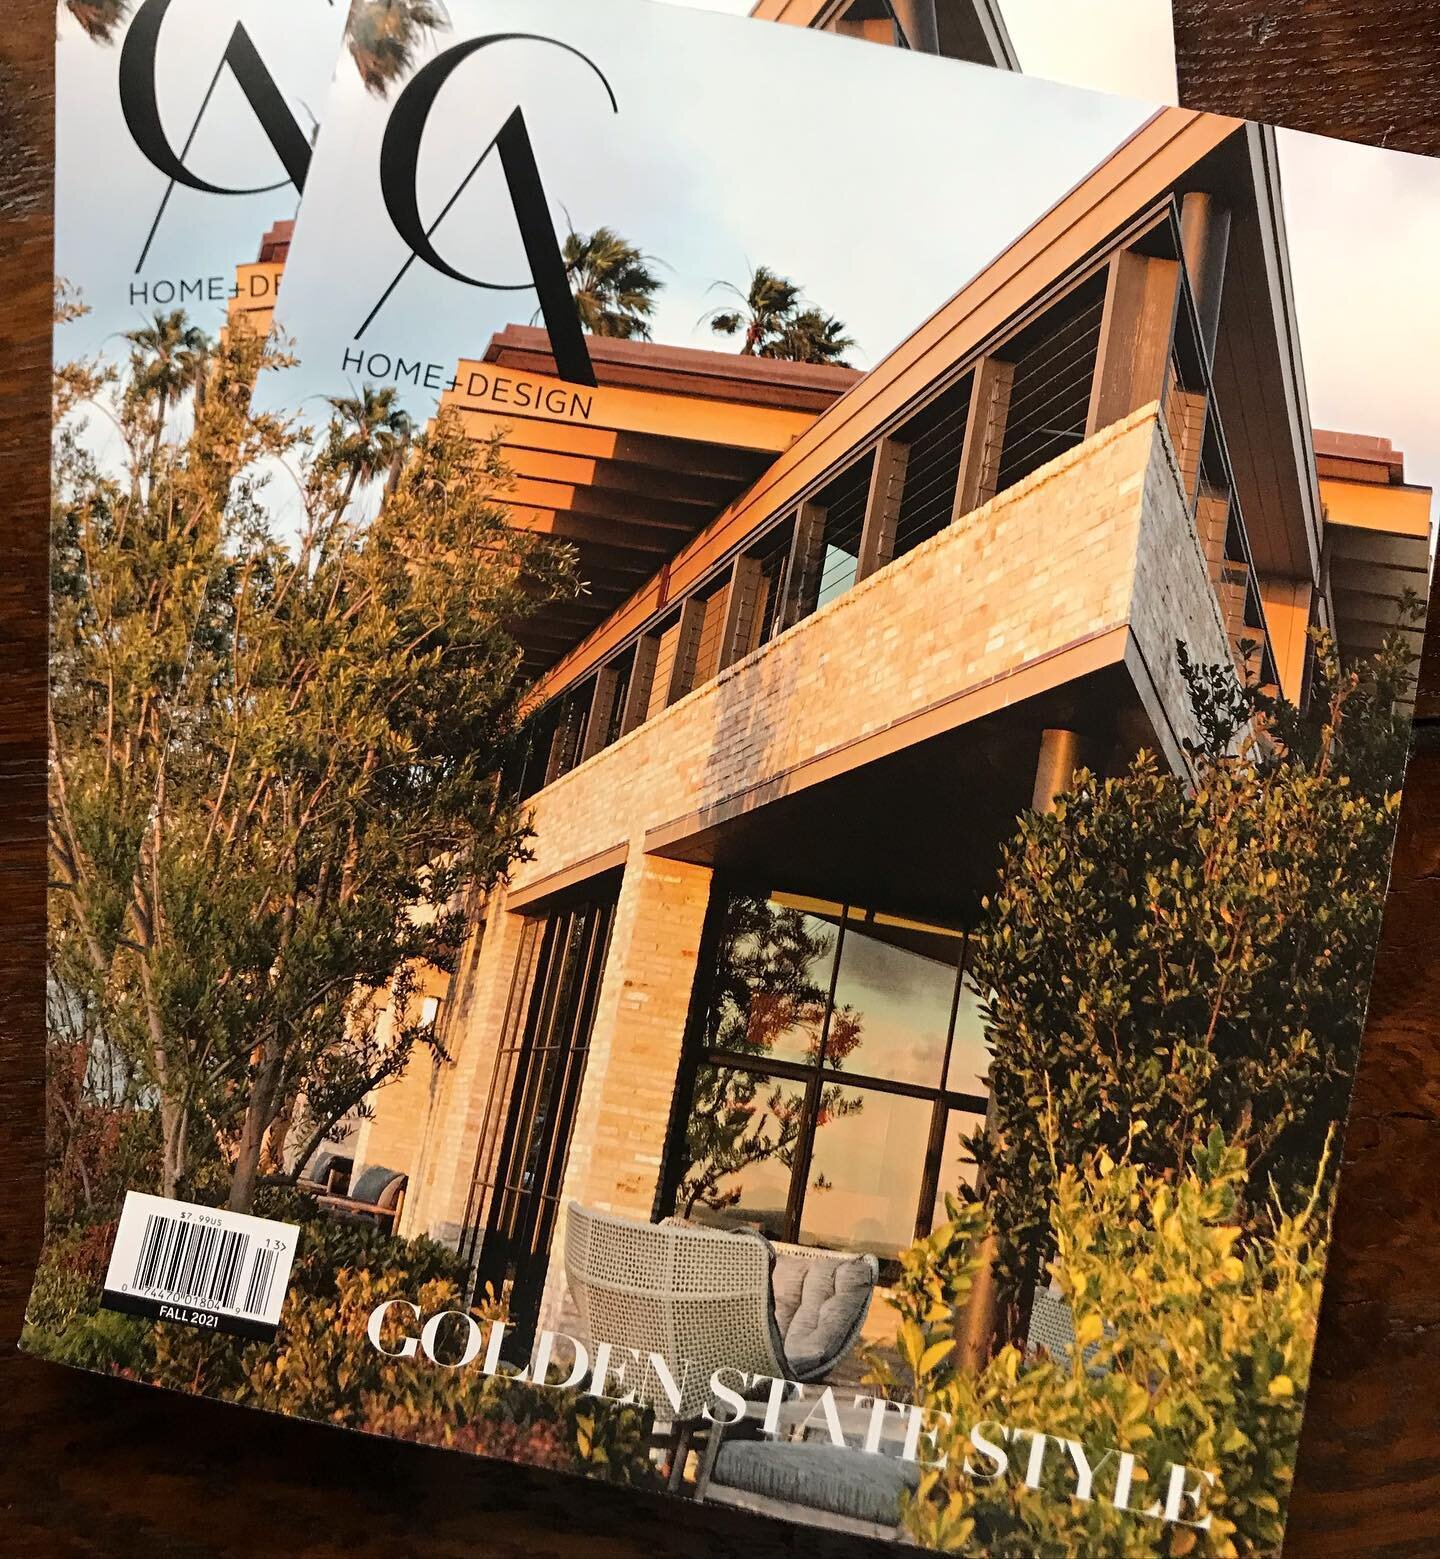 This happened&hellip; @cahomeanddesign Fall issue. 

25 years in this biz and I have never had so many gratitude boxes checked&hellip;

#1 - I get to make a living looking at art✔️

#2 - I get to work with the most talented artists, nicest gallery ow